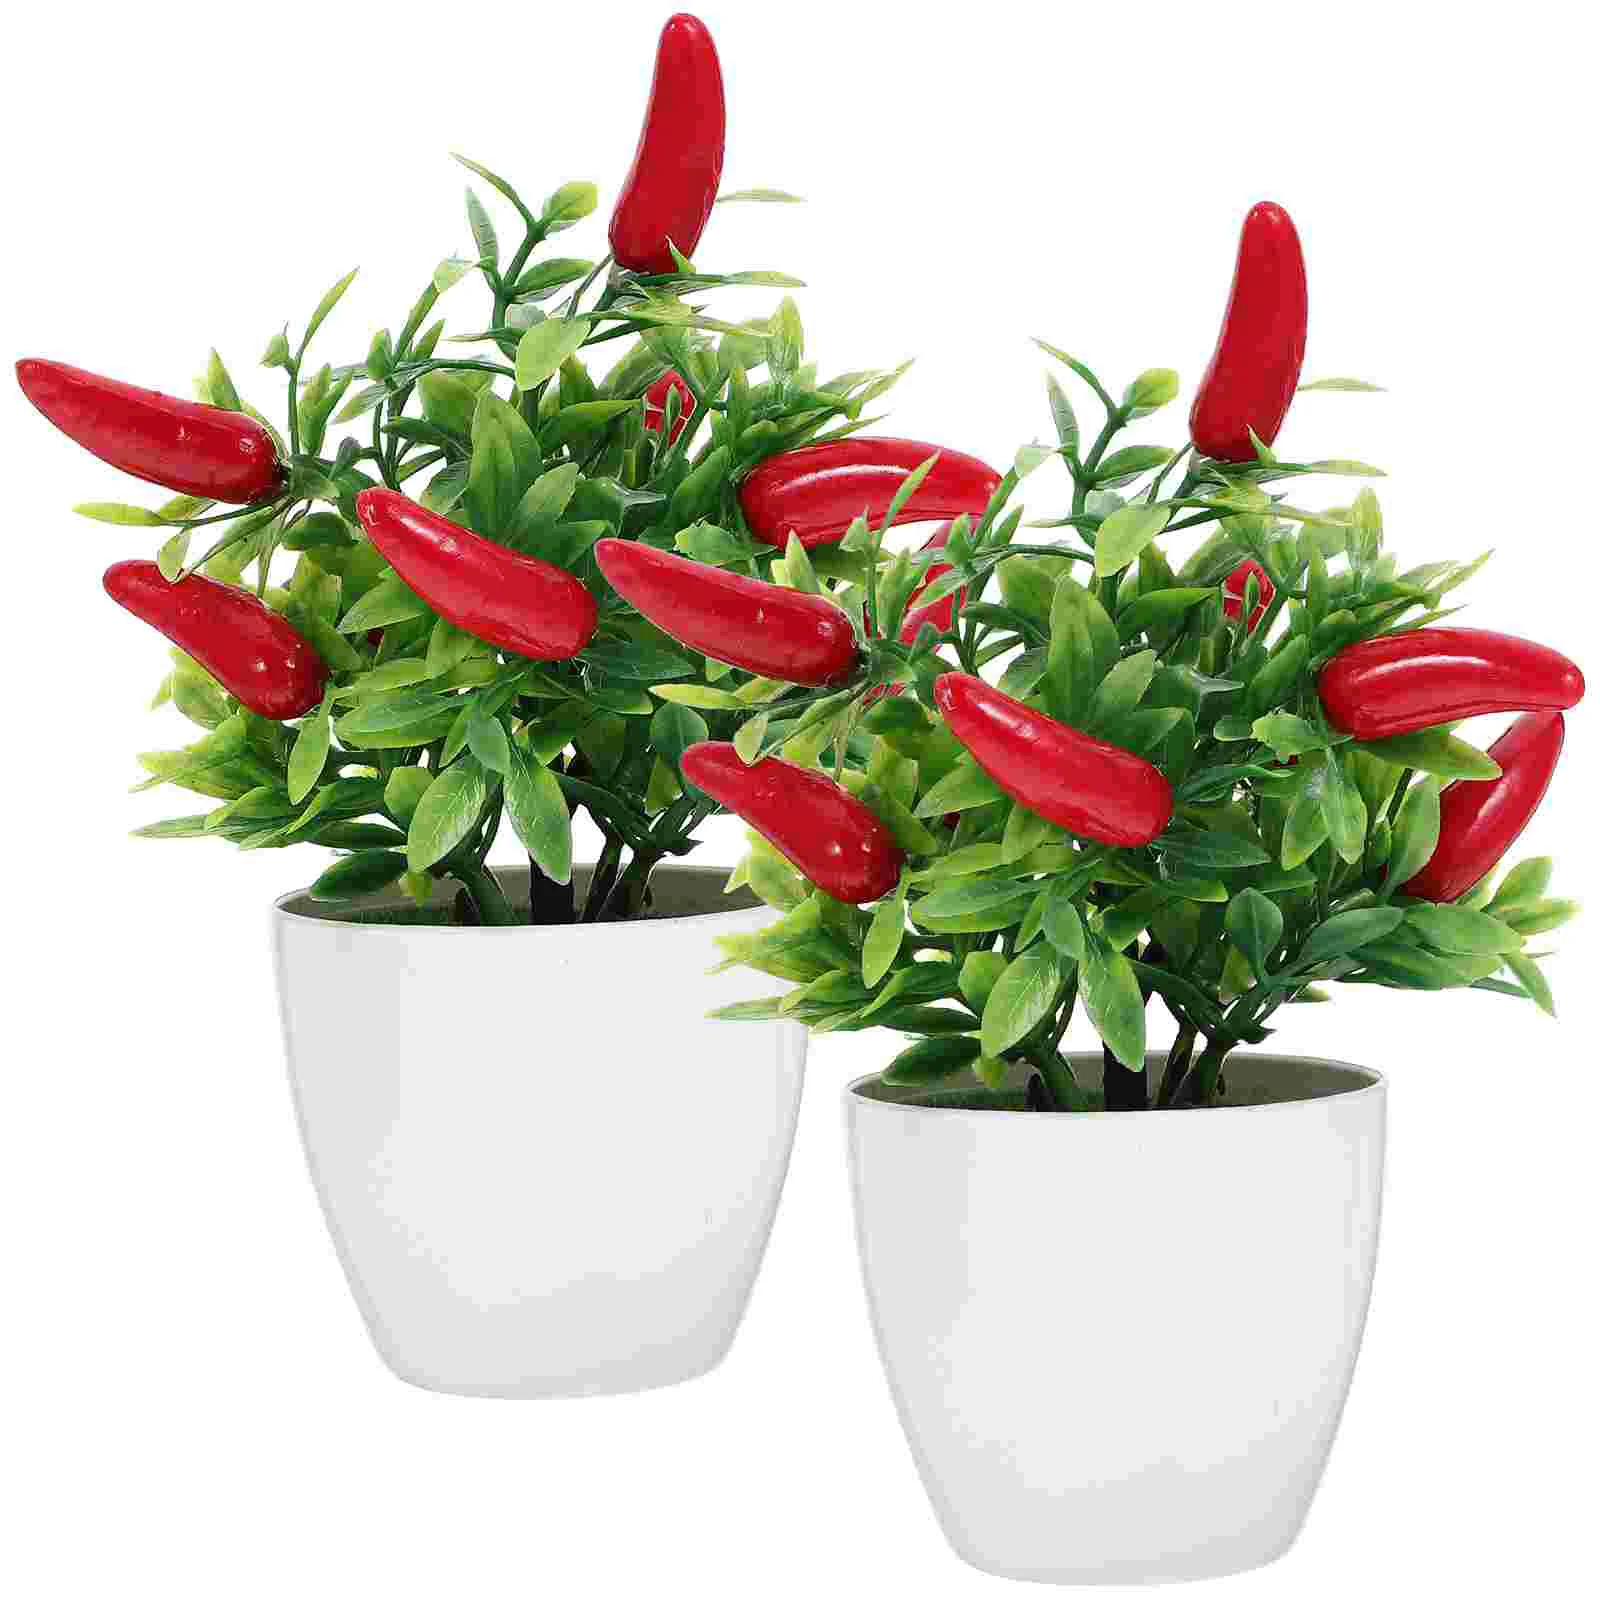 

2 Pcs Bonsai Pepper Kitchen Decor Fake Potted Tree Peppers Plastic Artificial Decorations